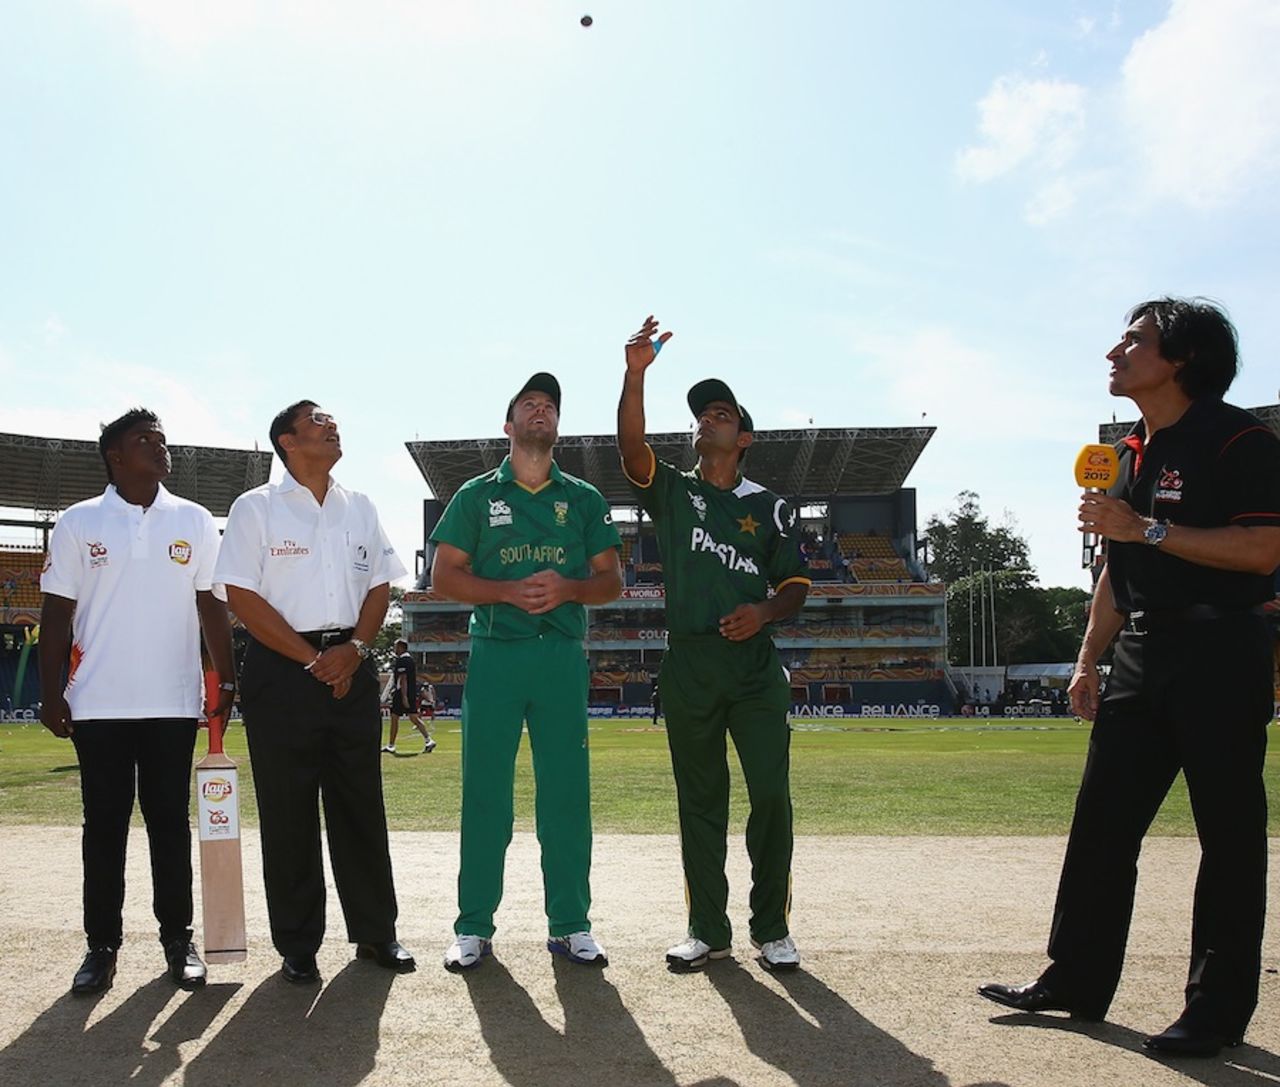 Mohammad Hafeez and AB de Villiers at the toss, Pakistan v South Africa, World Twenty 20 2012, Super Eights, Colombo, September 28, 2012